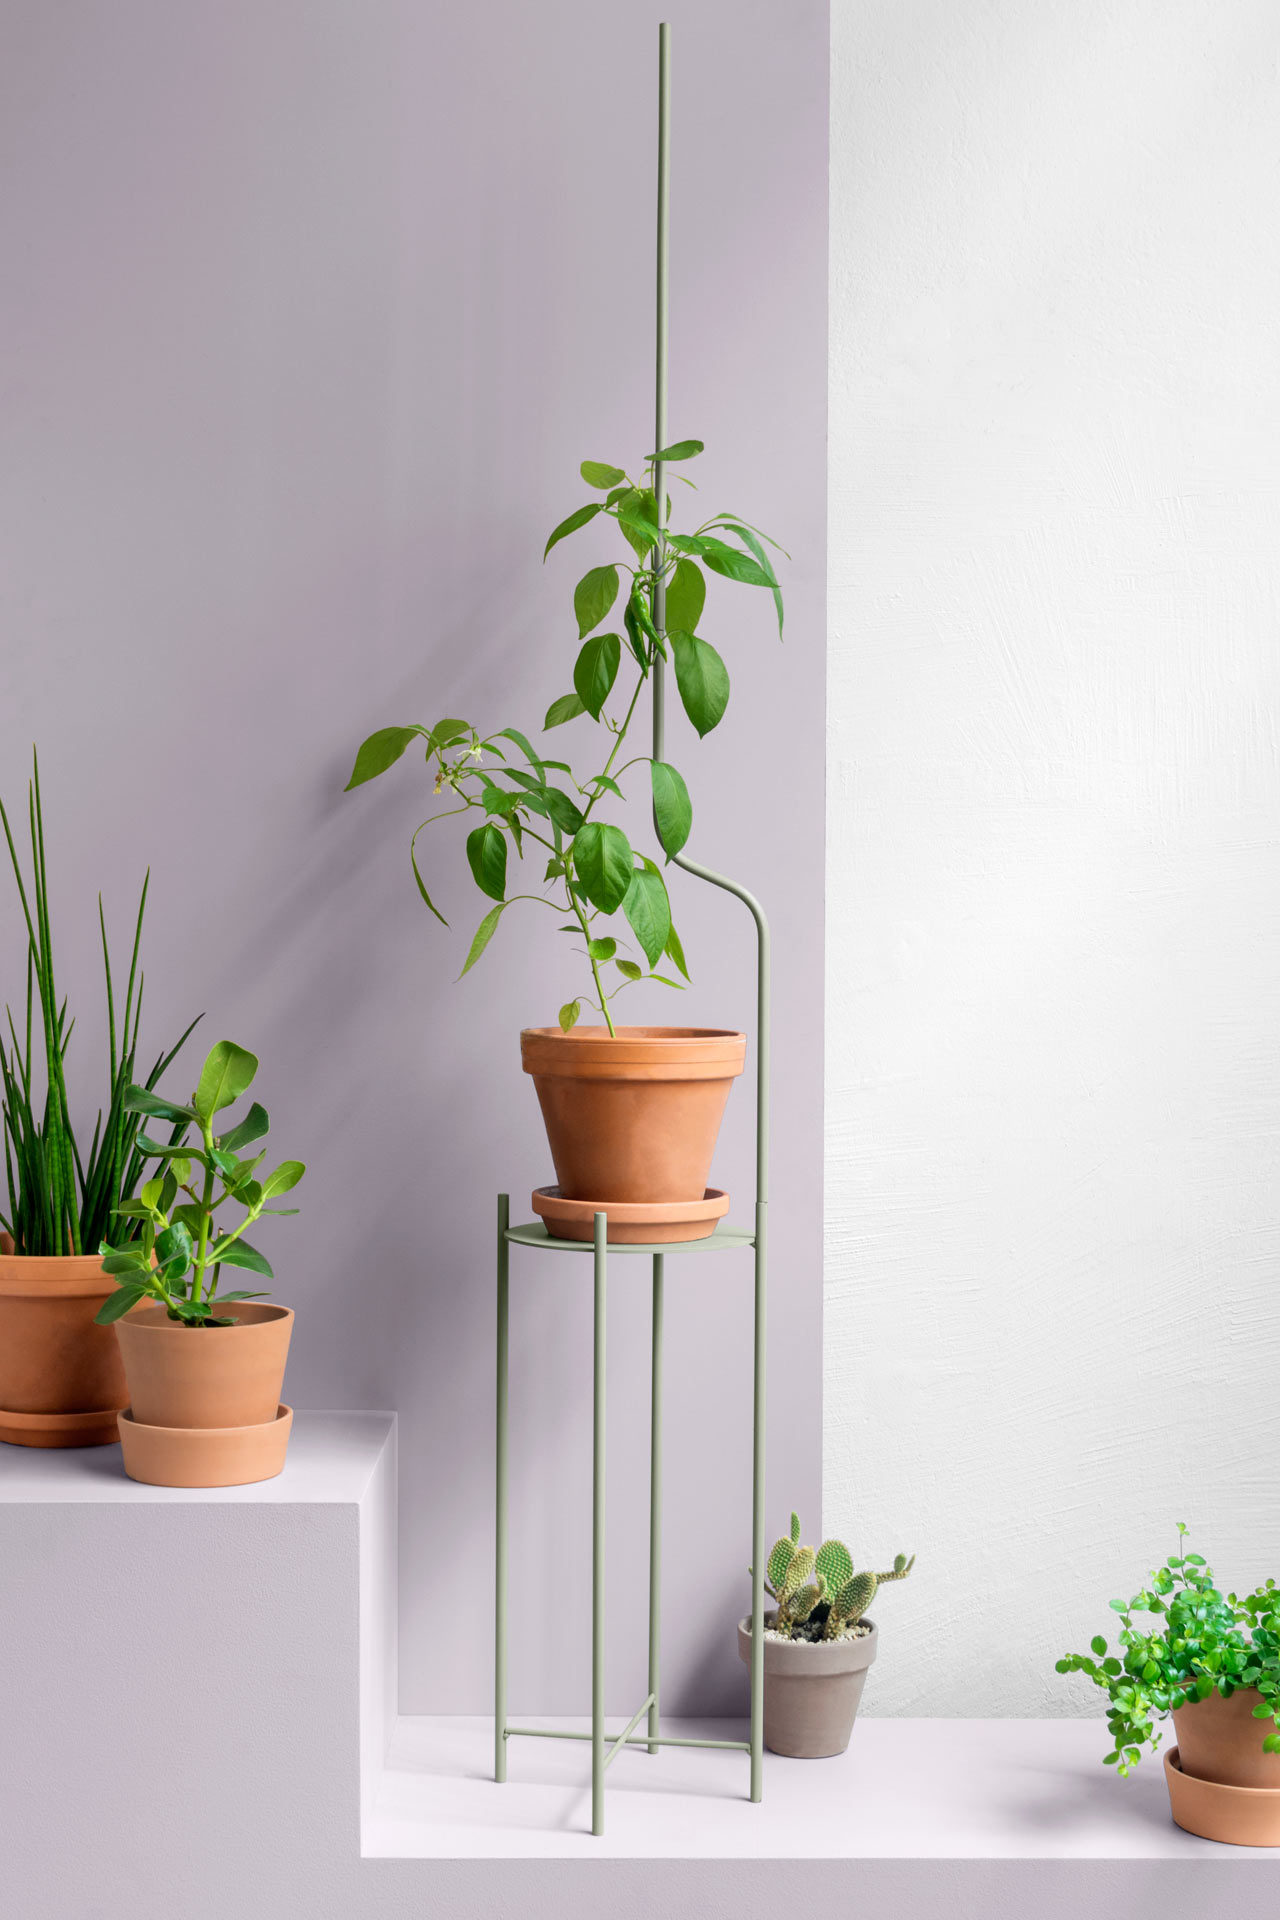 SUPERLIFE Wants Liana to Support Your Plants as They Grow